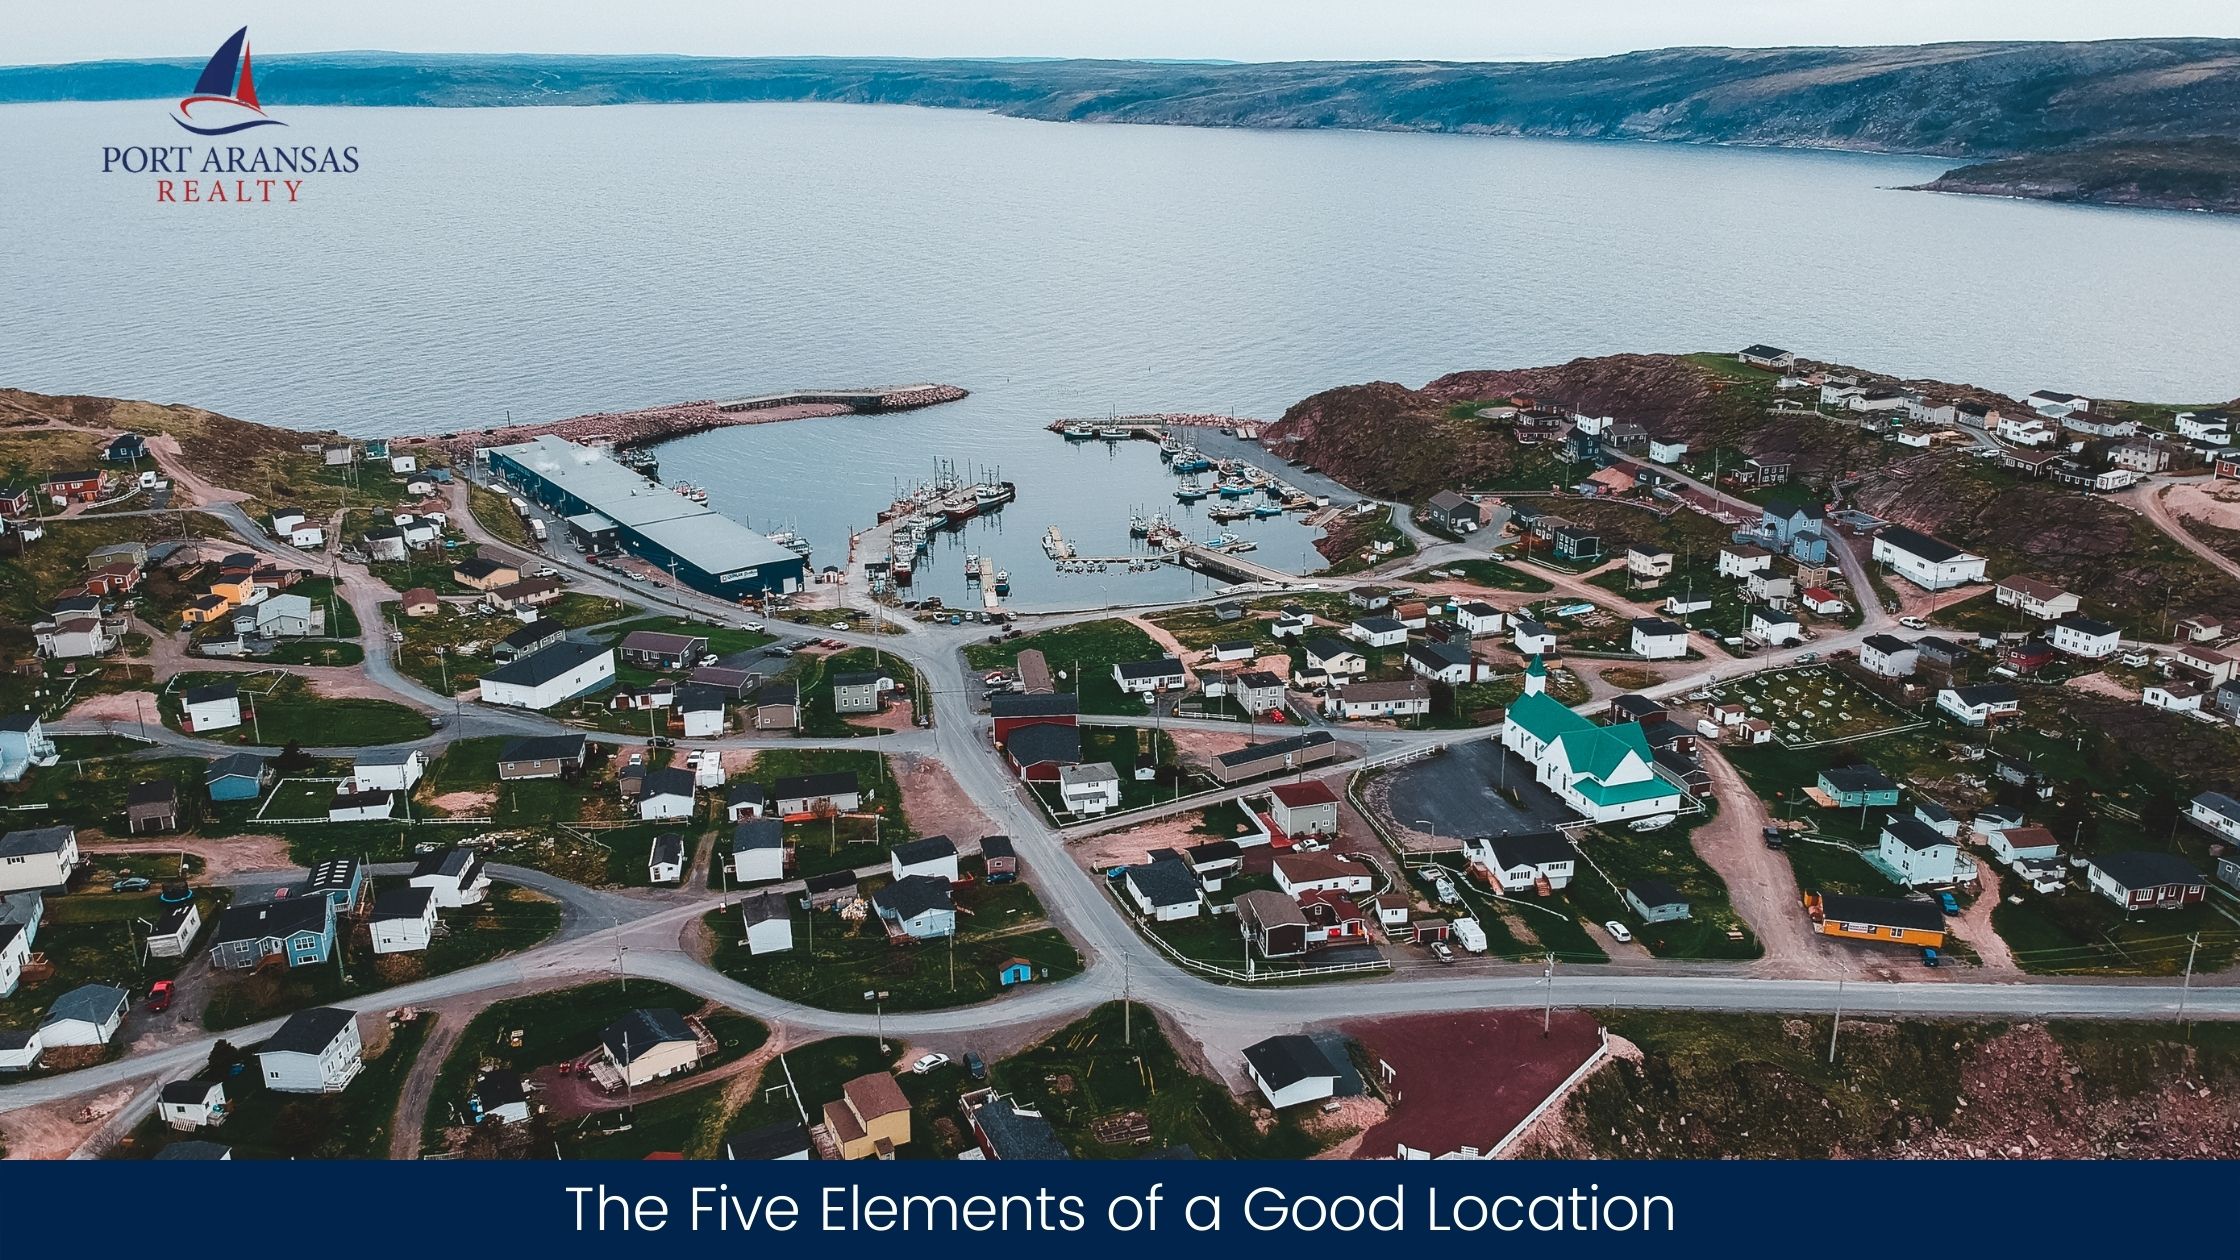 The Five Elements of a Good Location